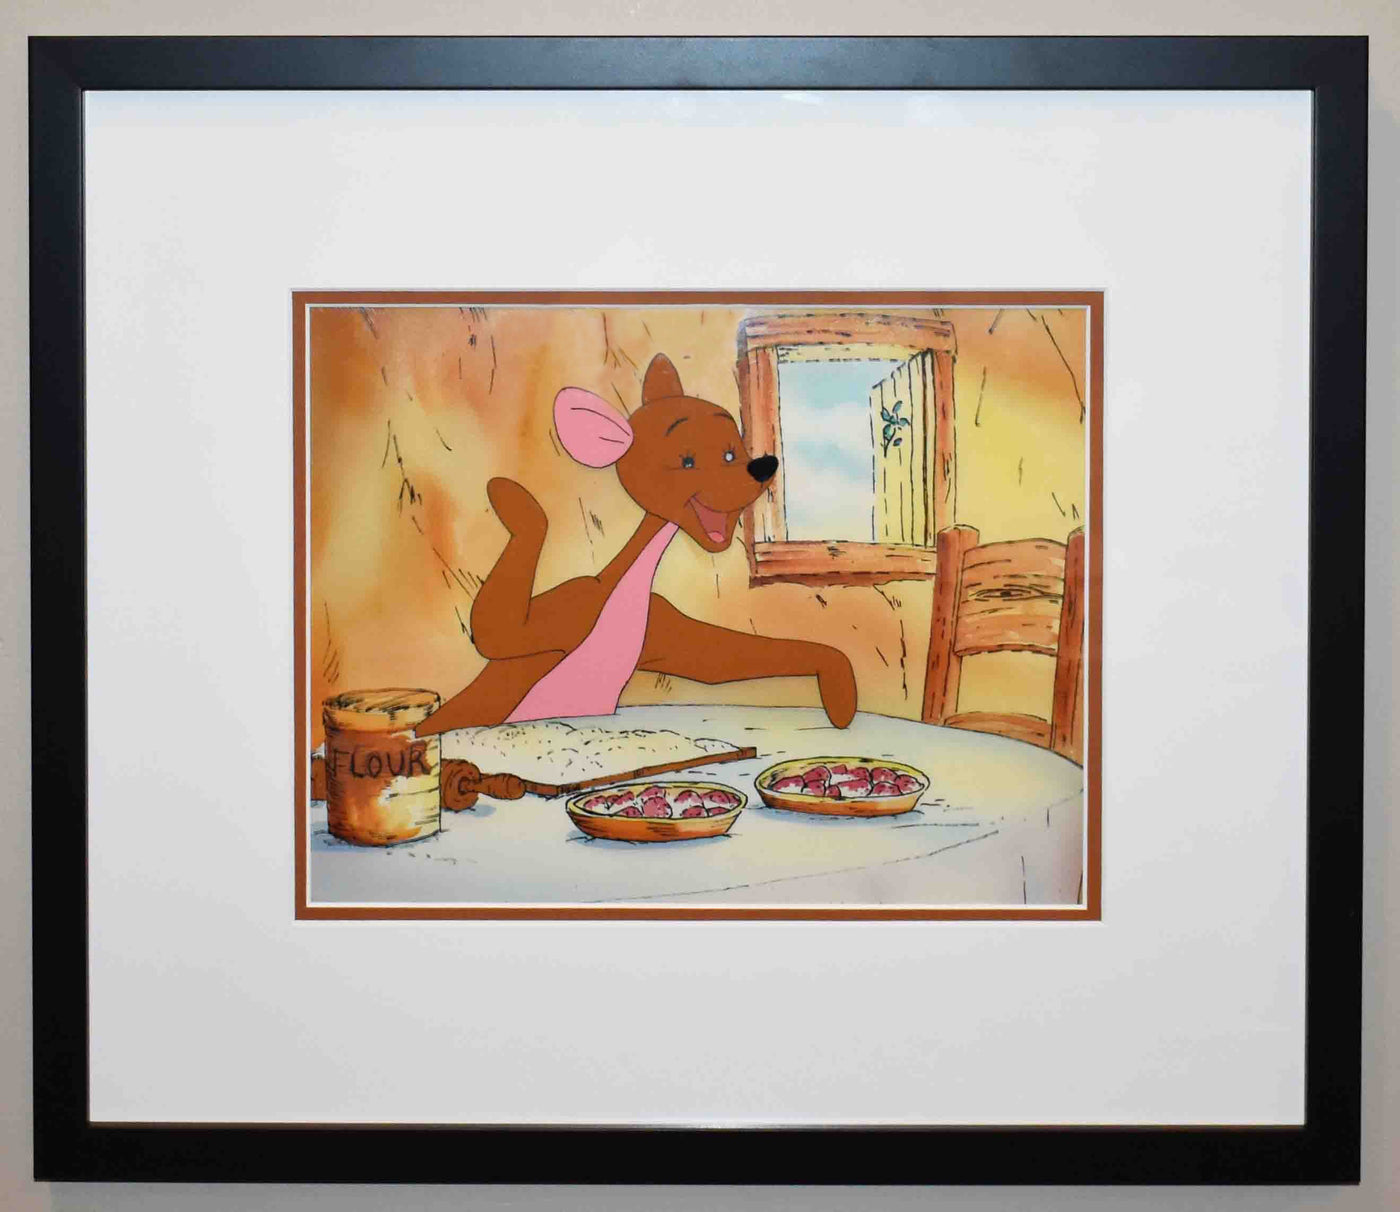 Original Walt Disney Educational Television Production Cel from Winnie the Pooh featuring Kanga